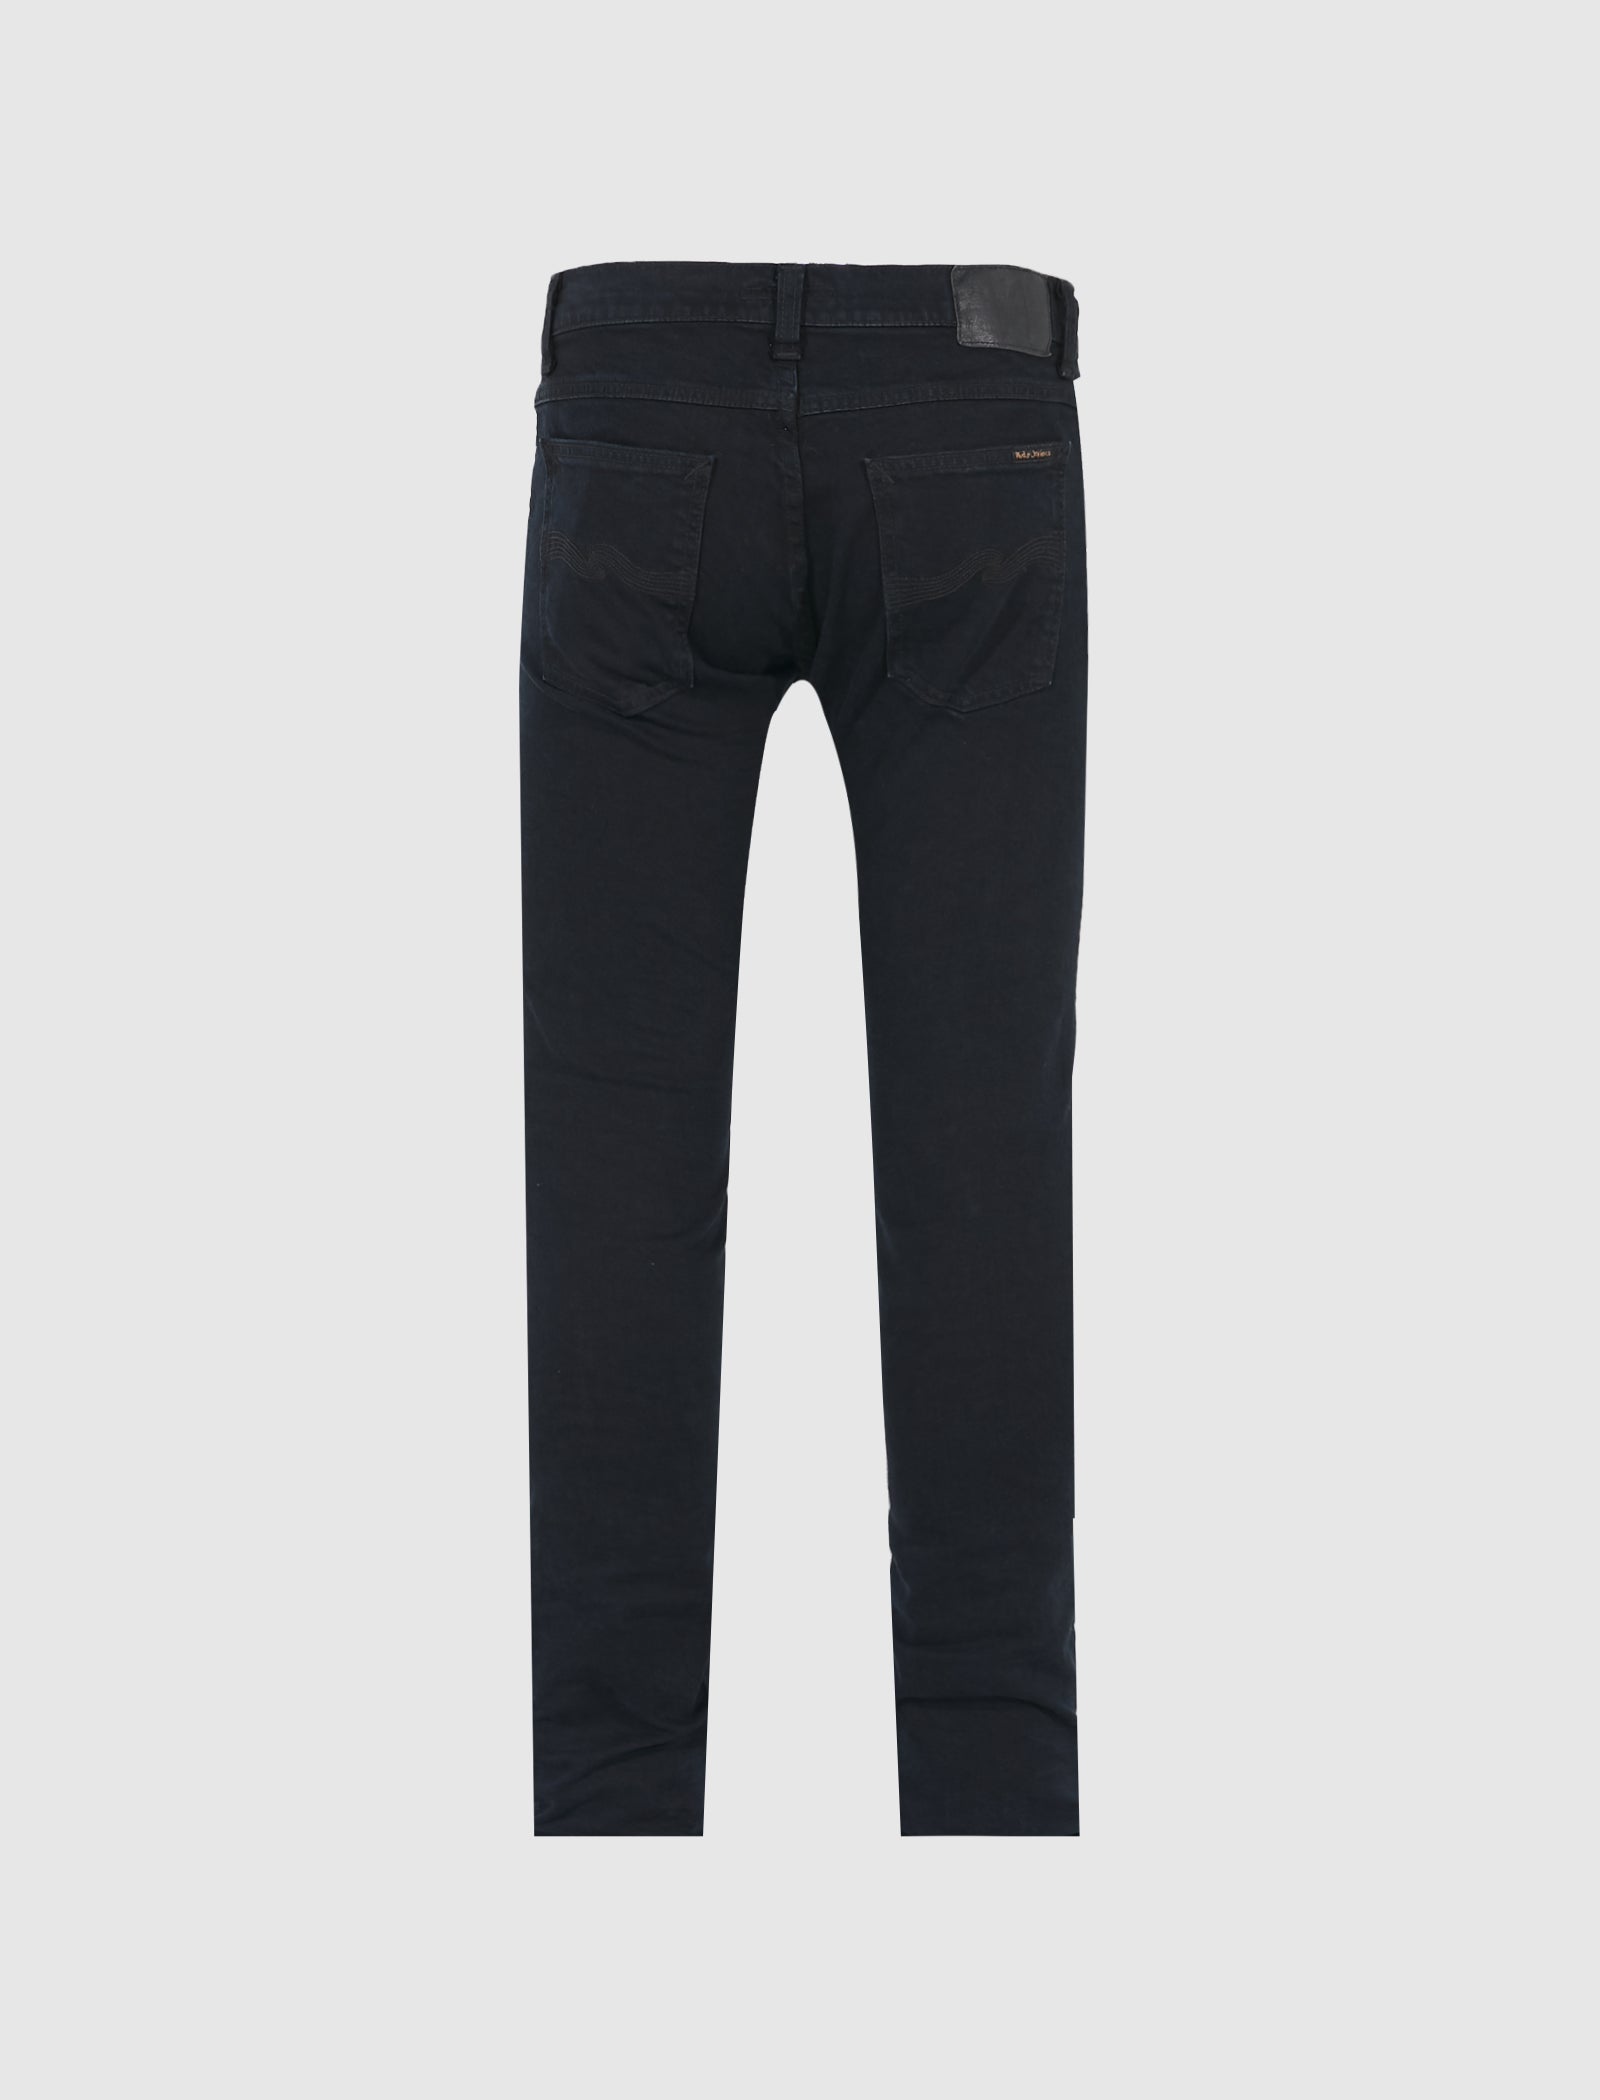 NUDIE JEANS CO. TIGHT TERRY RUMBLING